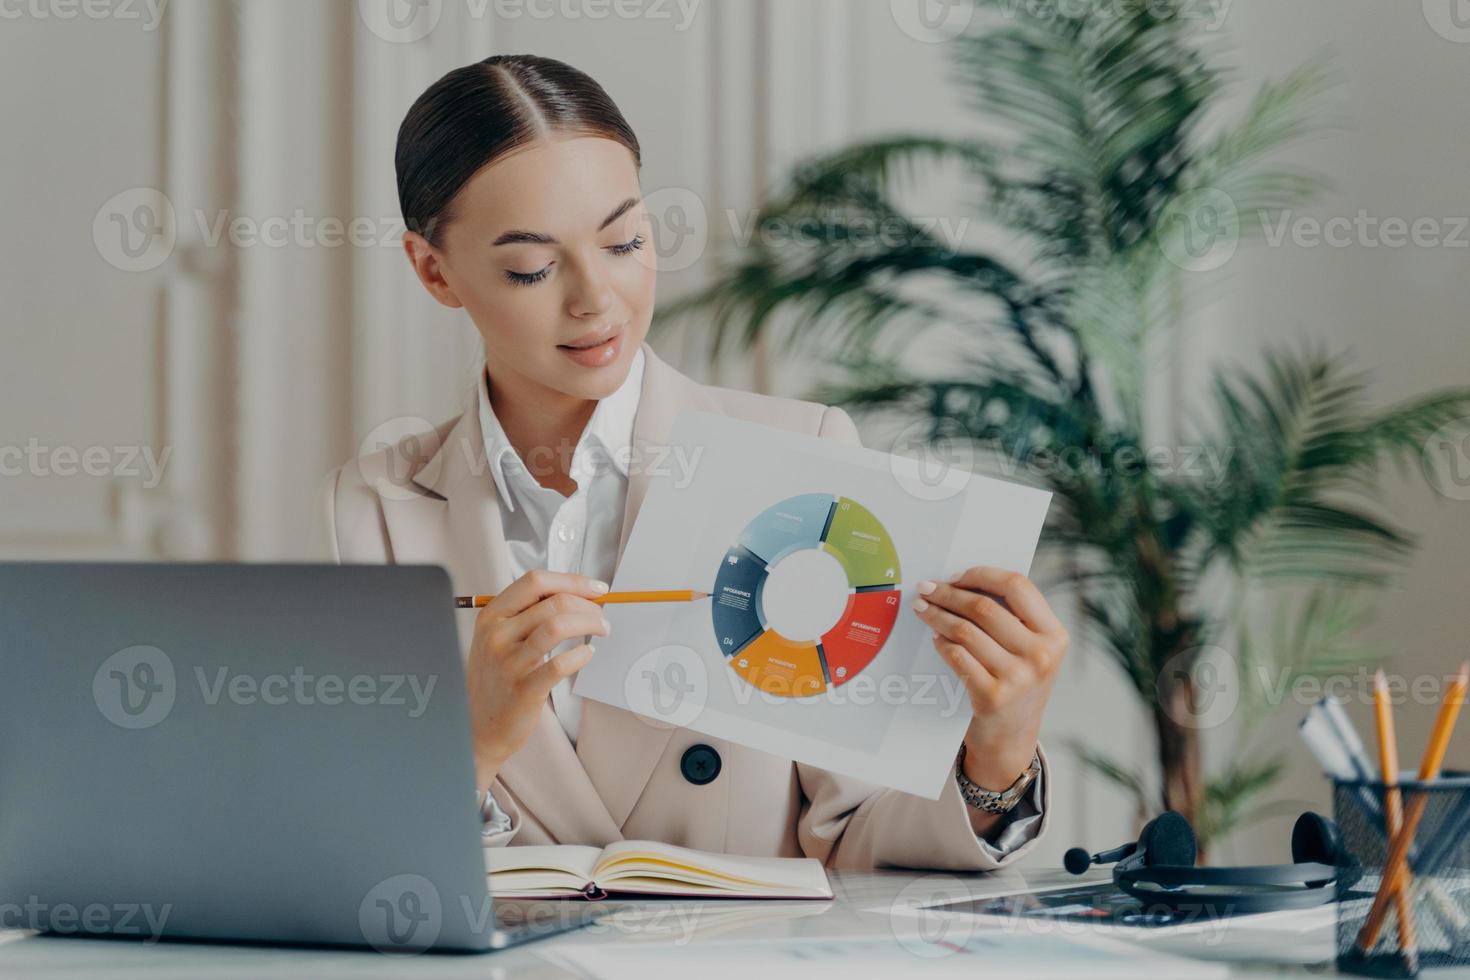 Business woman showing financial data with pencil during web conference photo